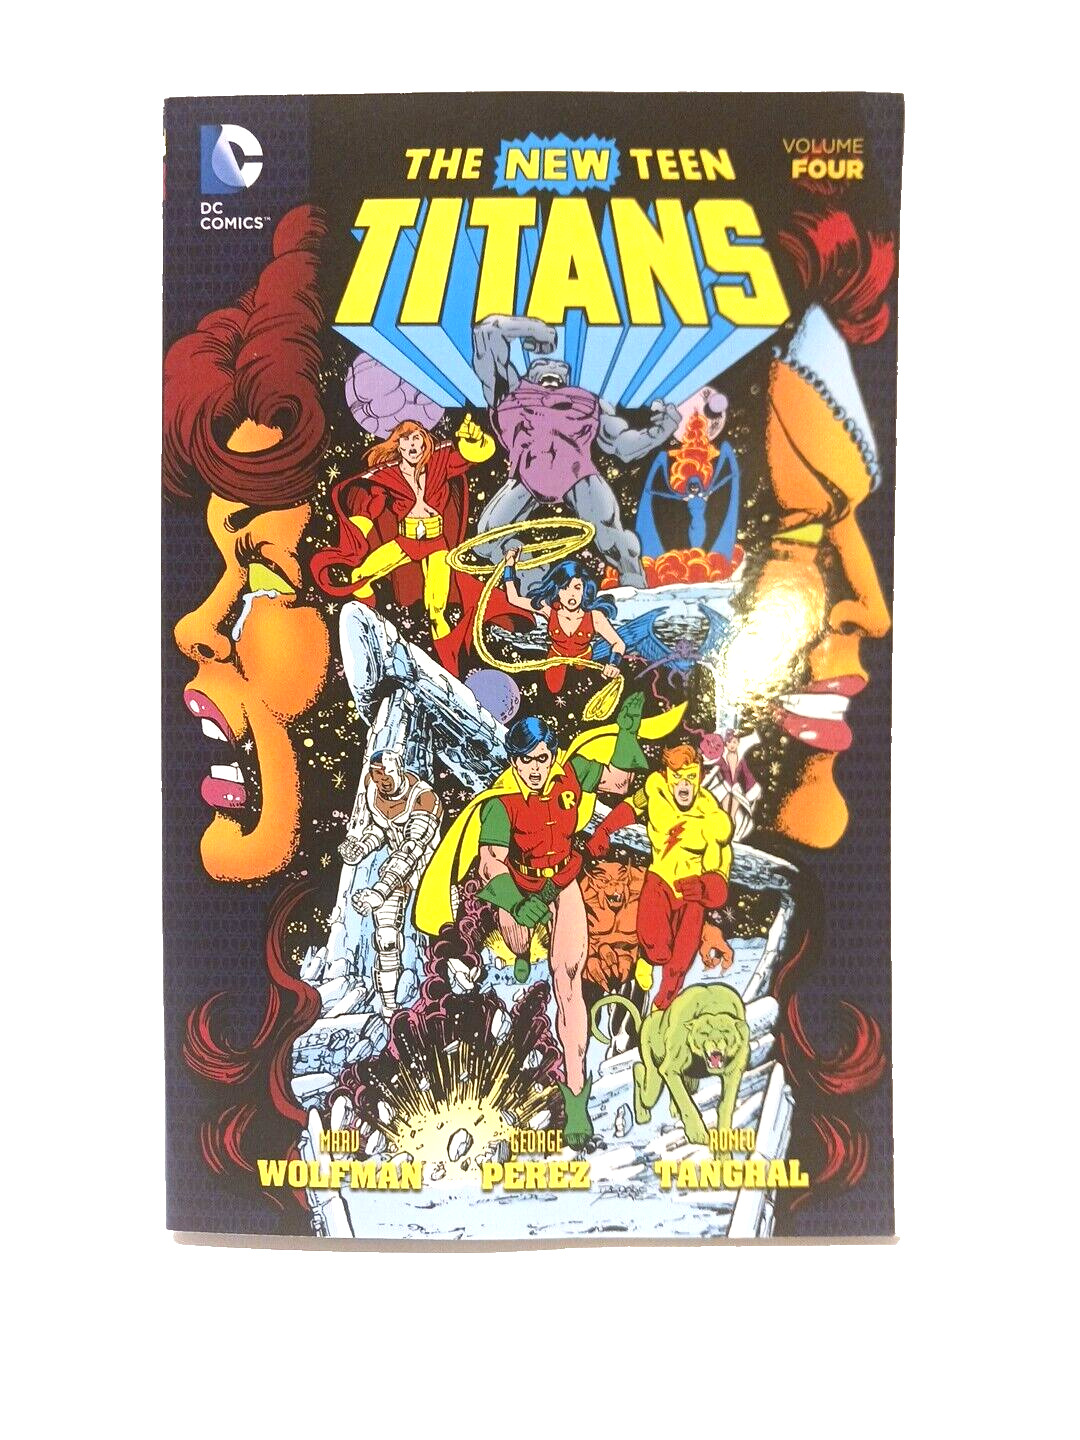 The New Teen Titans Volume Four 4 DC Comics 2016 First Edition Paperback TPB